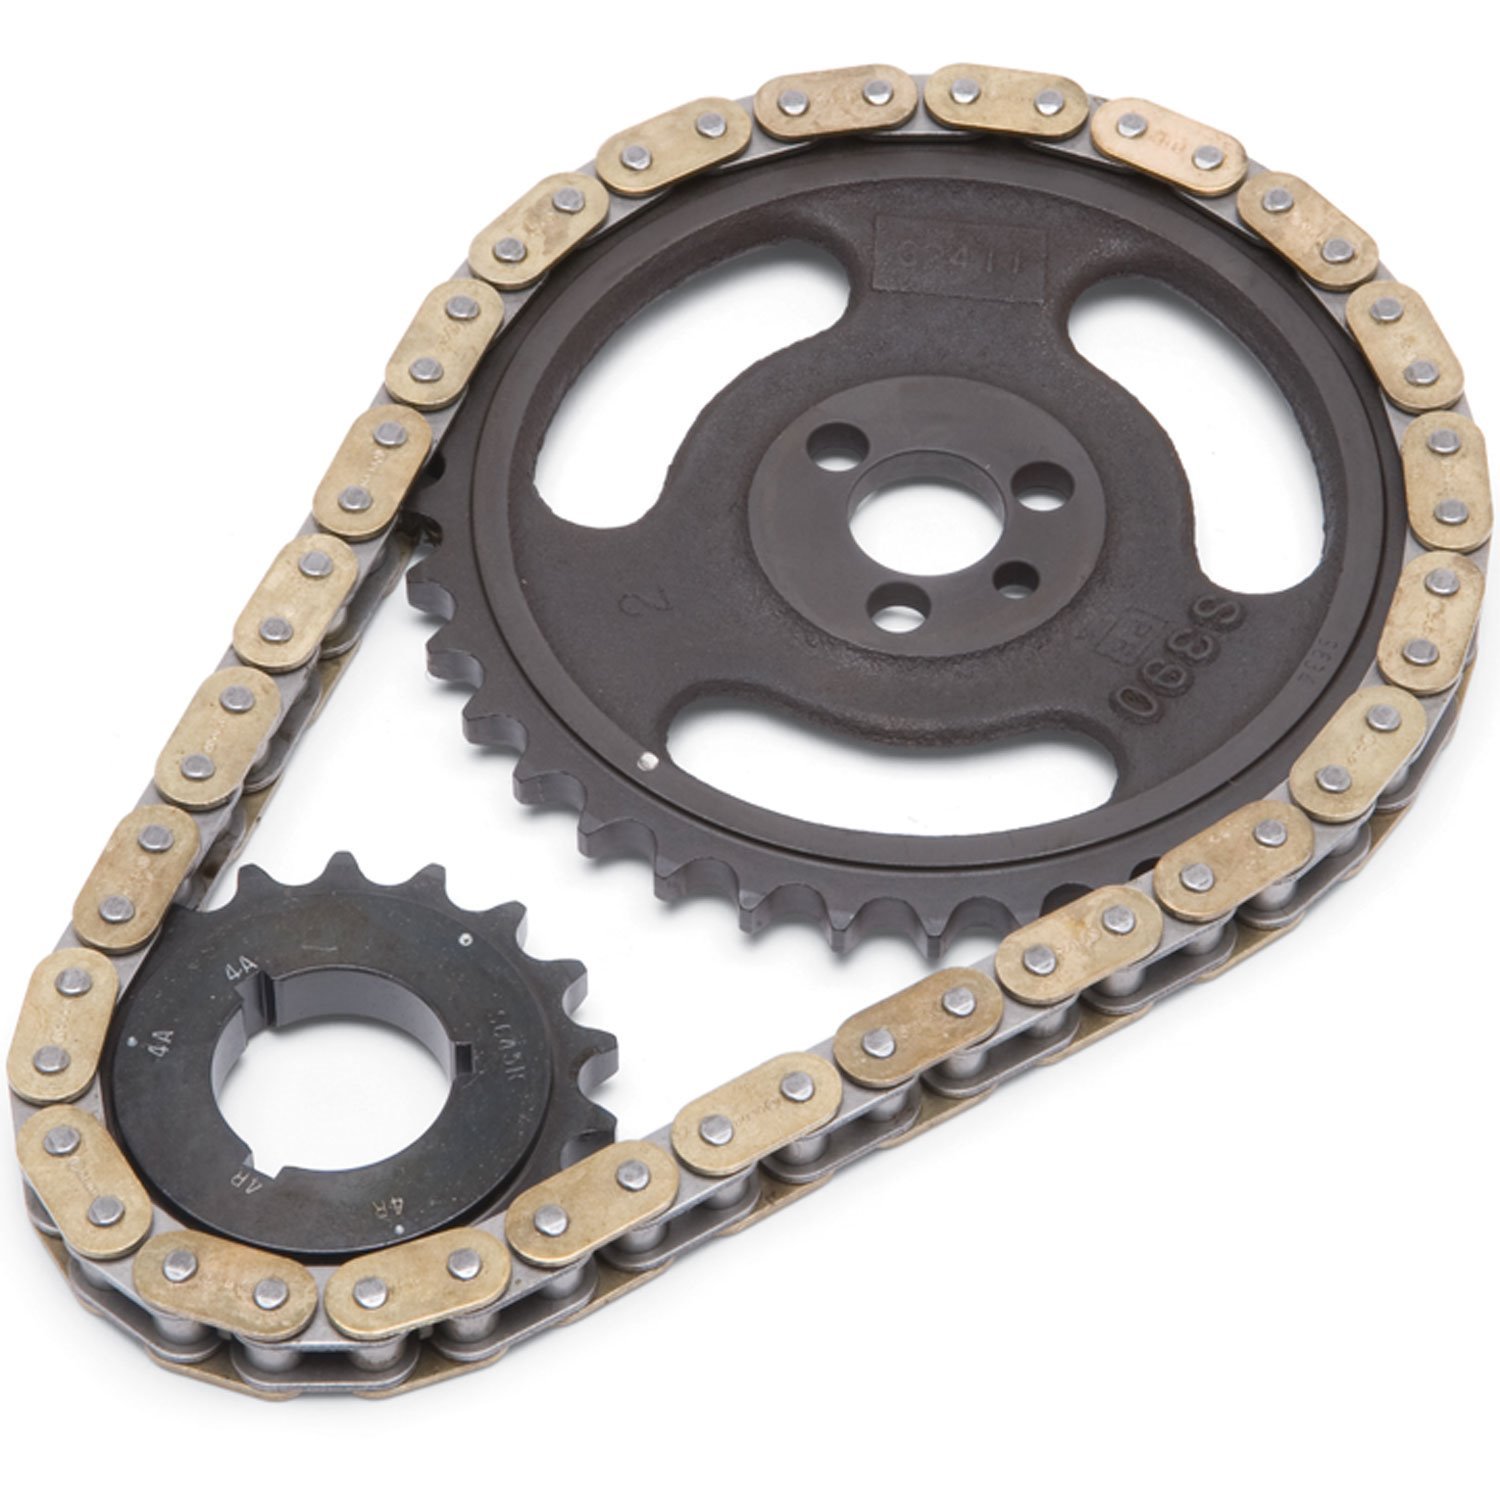 Performer-Link Timing Chain Set for 1958-1965 Chevy 348/409 W-Series V8